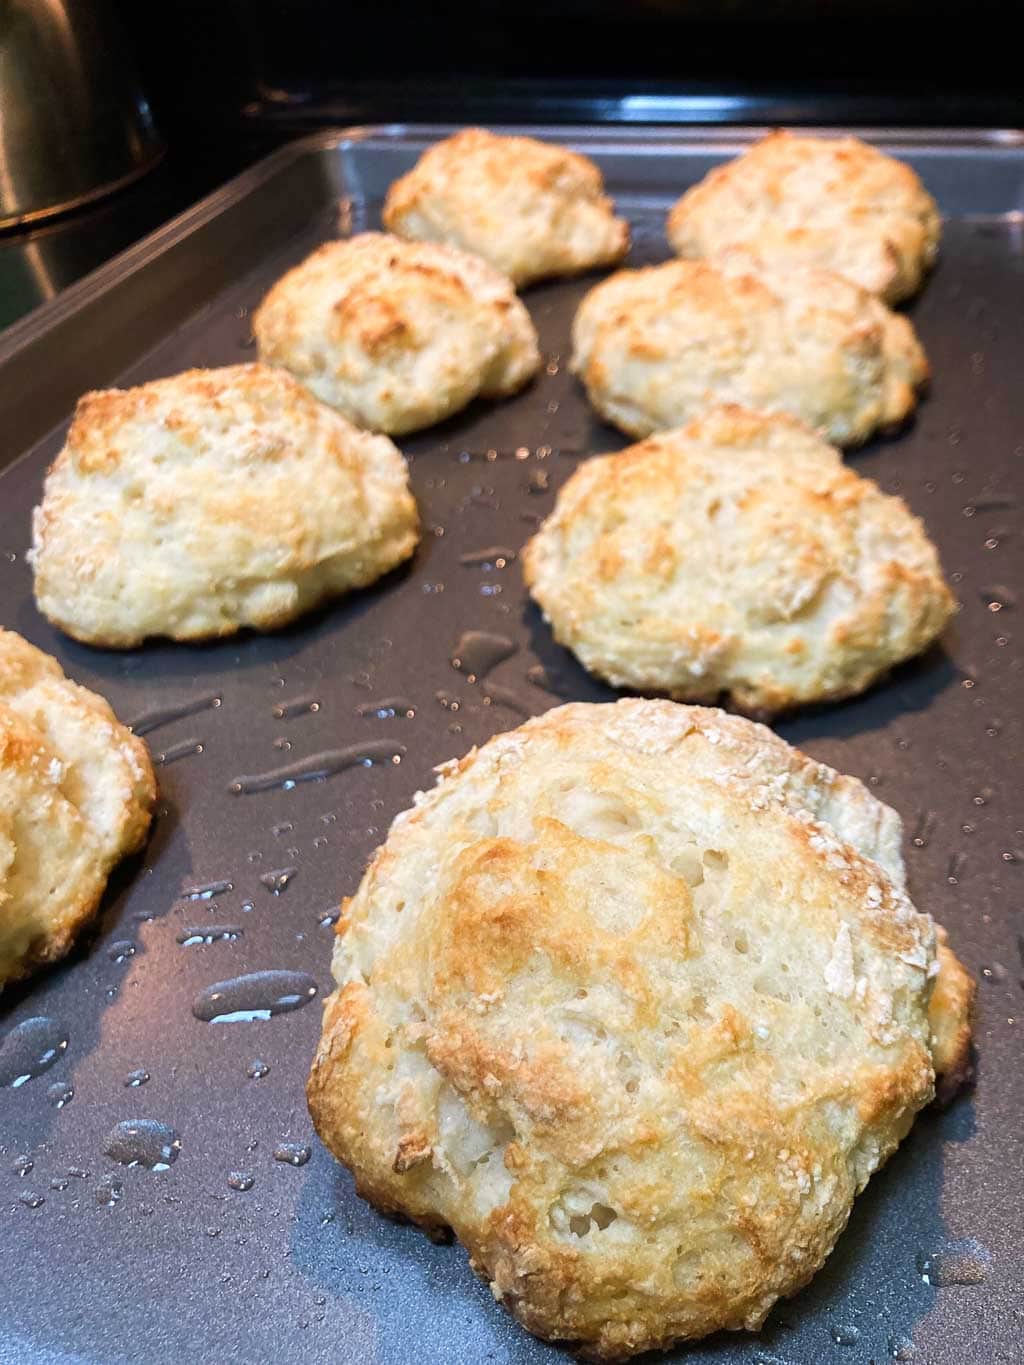 Homemade yogurt biscuits for biscuits and vegetarian gravy